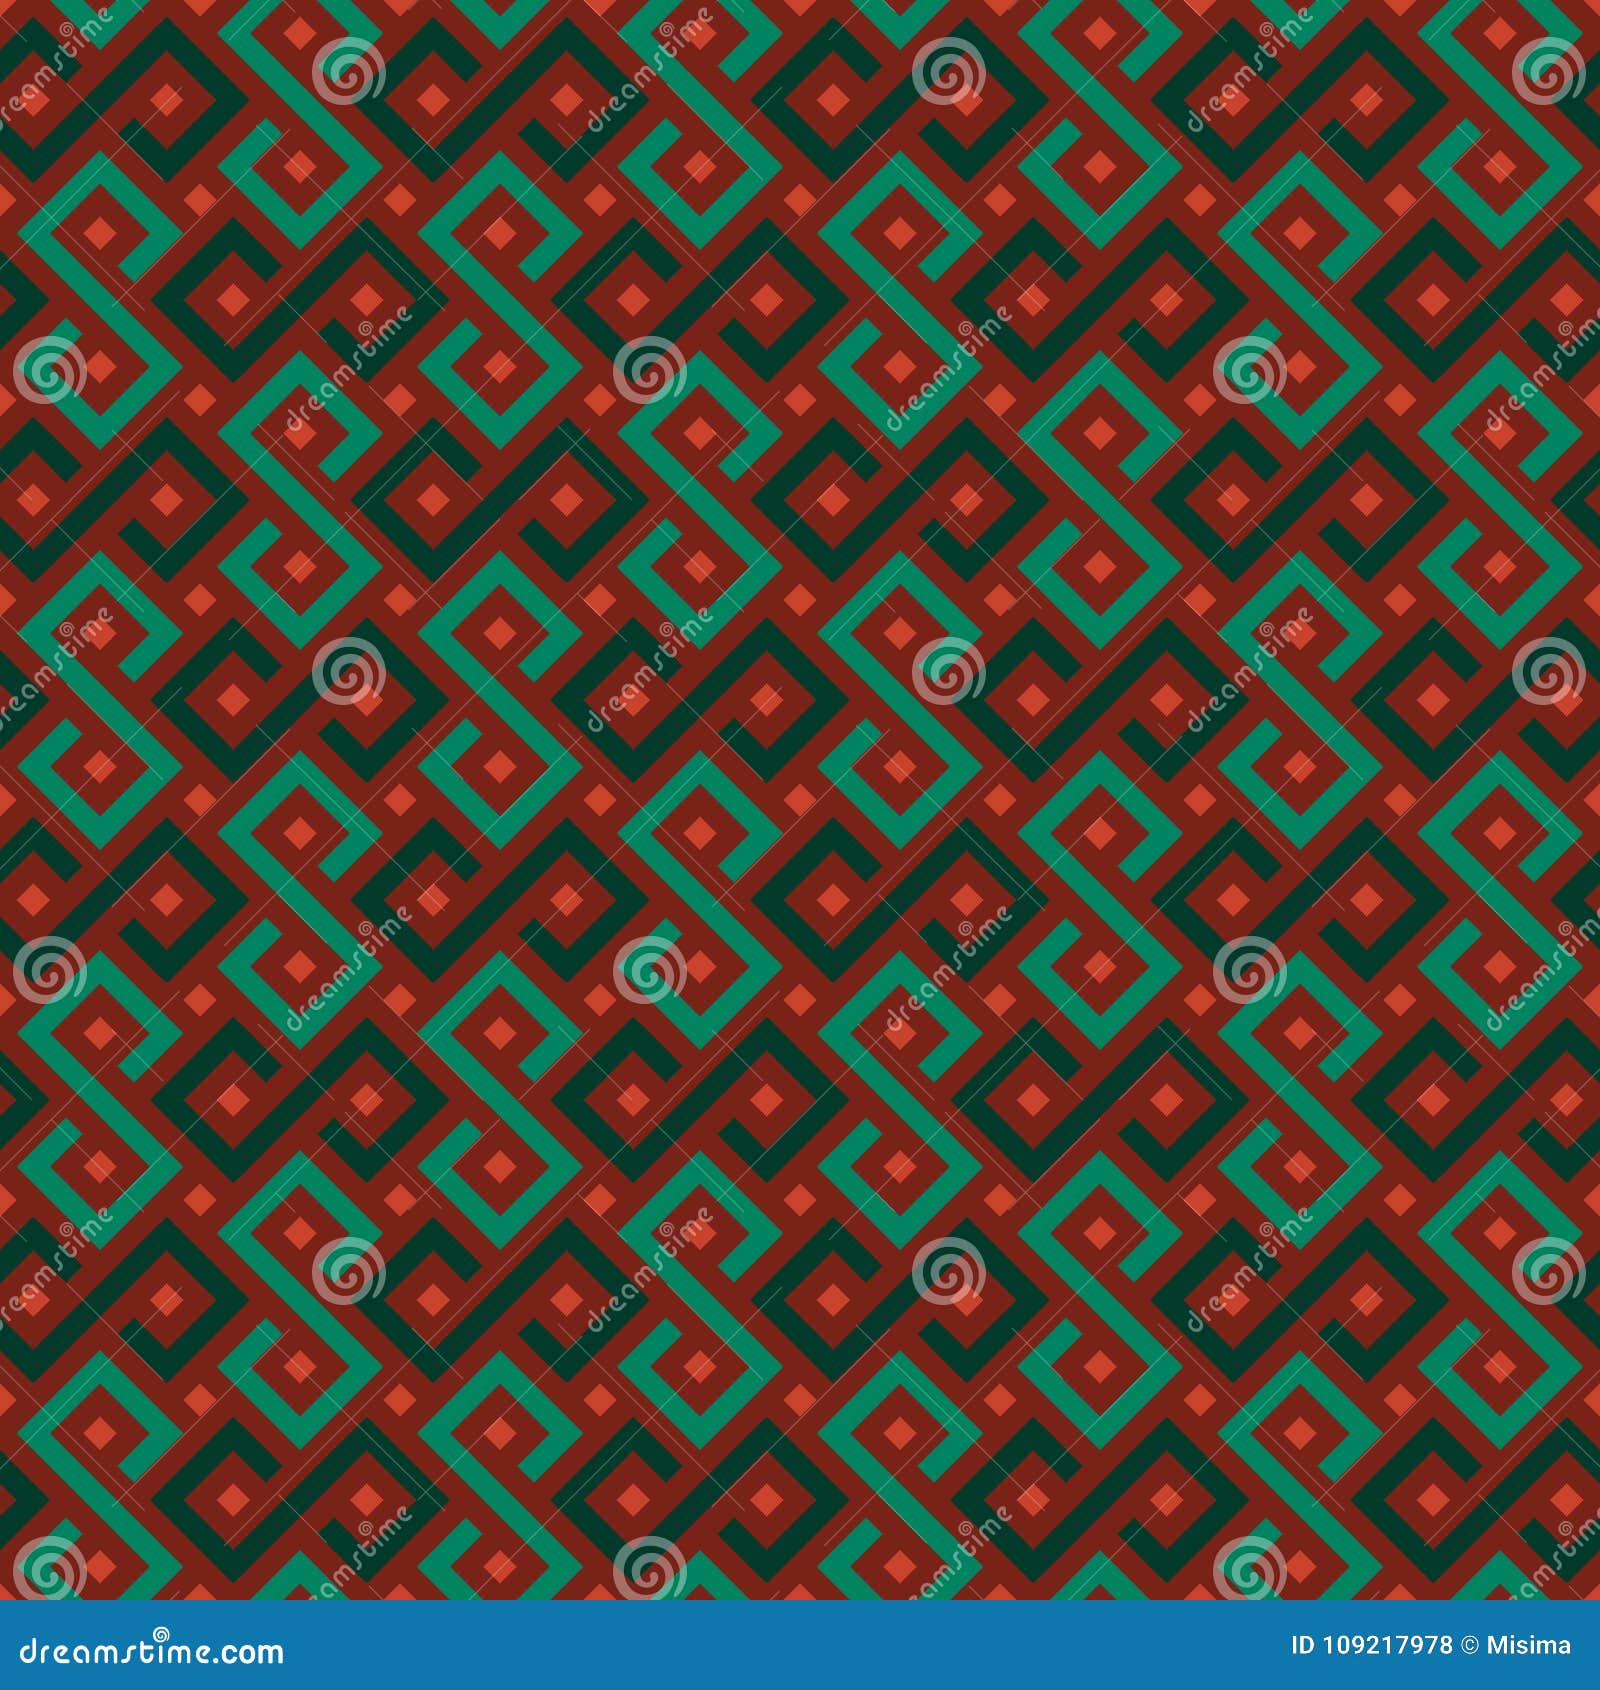 colorful african geometric ornament.